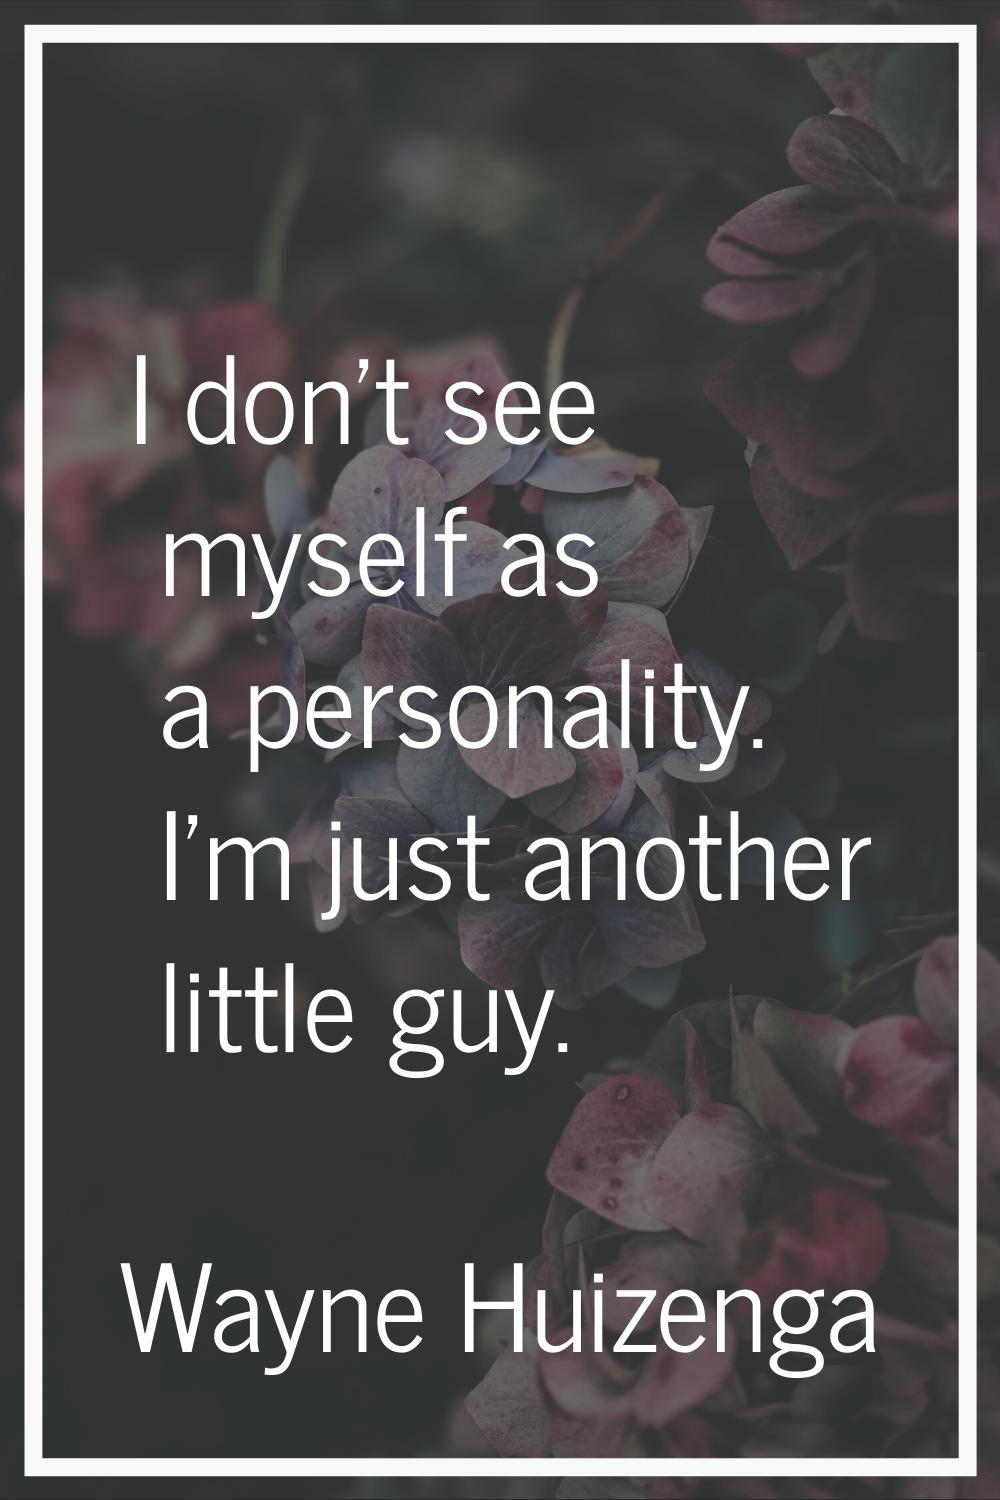 I don't see myself as a personality. I'm just another little guy.